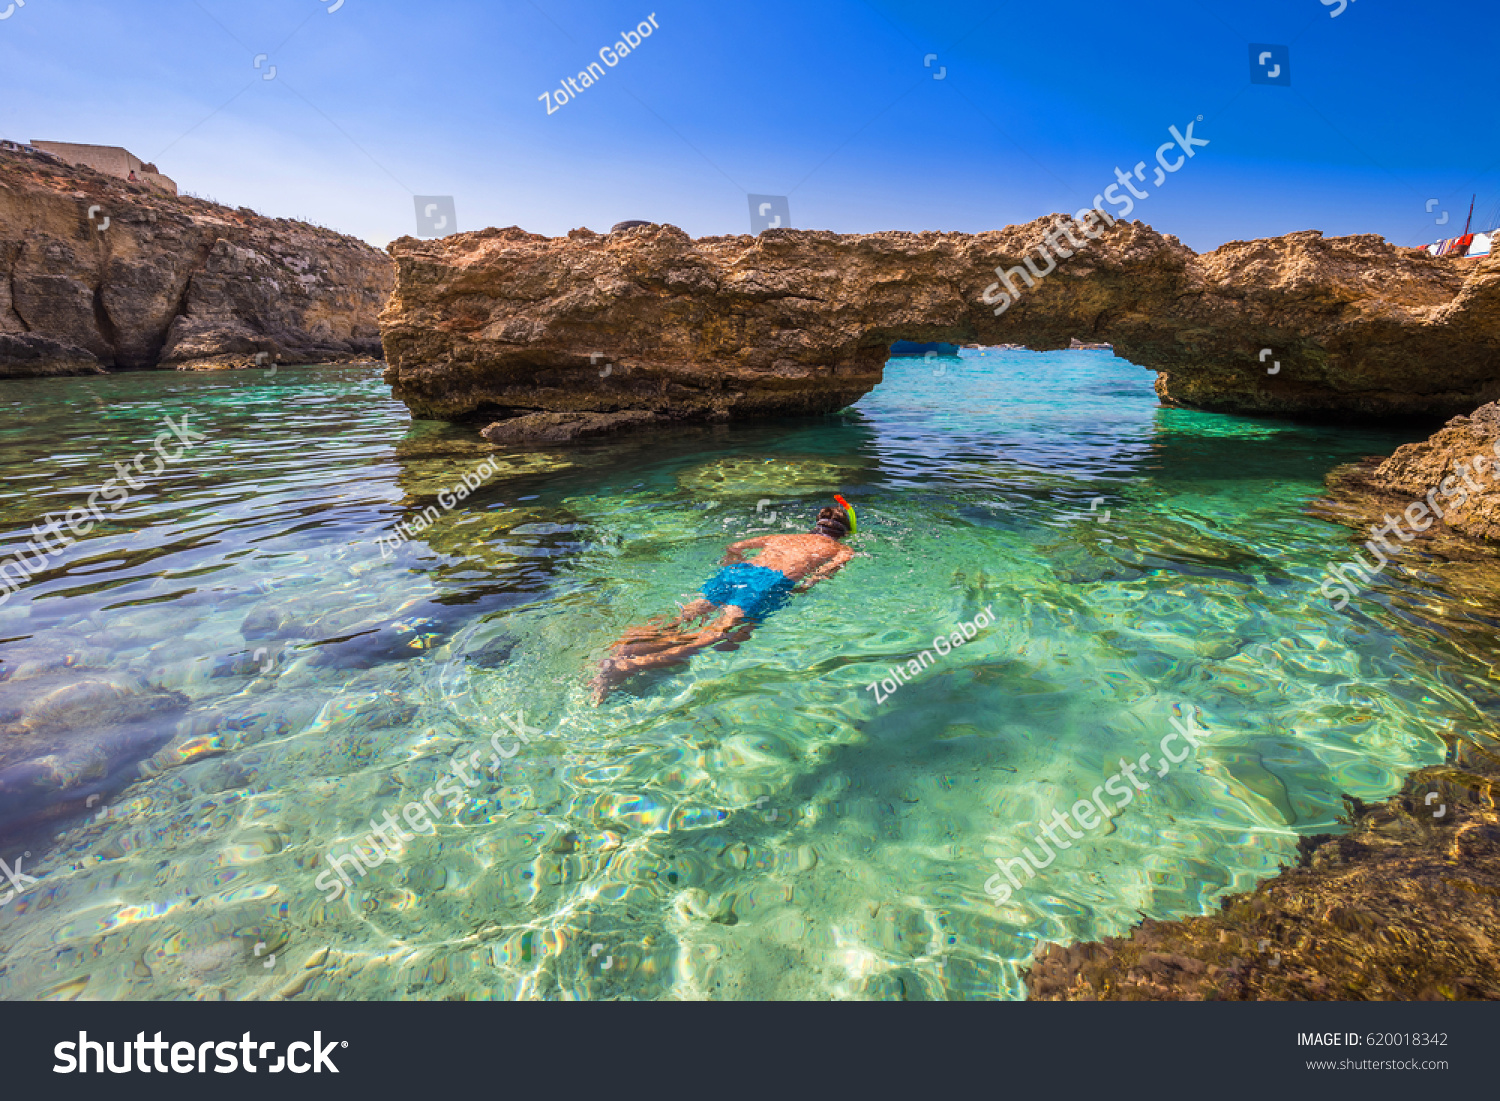 Blue Lagoon, Malta - Snorkeling tourist at the caves of the Blue Lagoon on the island of Comino on a bright sunny summer day with blue sky #620018342